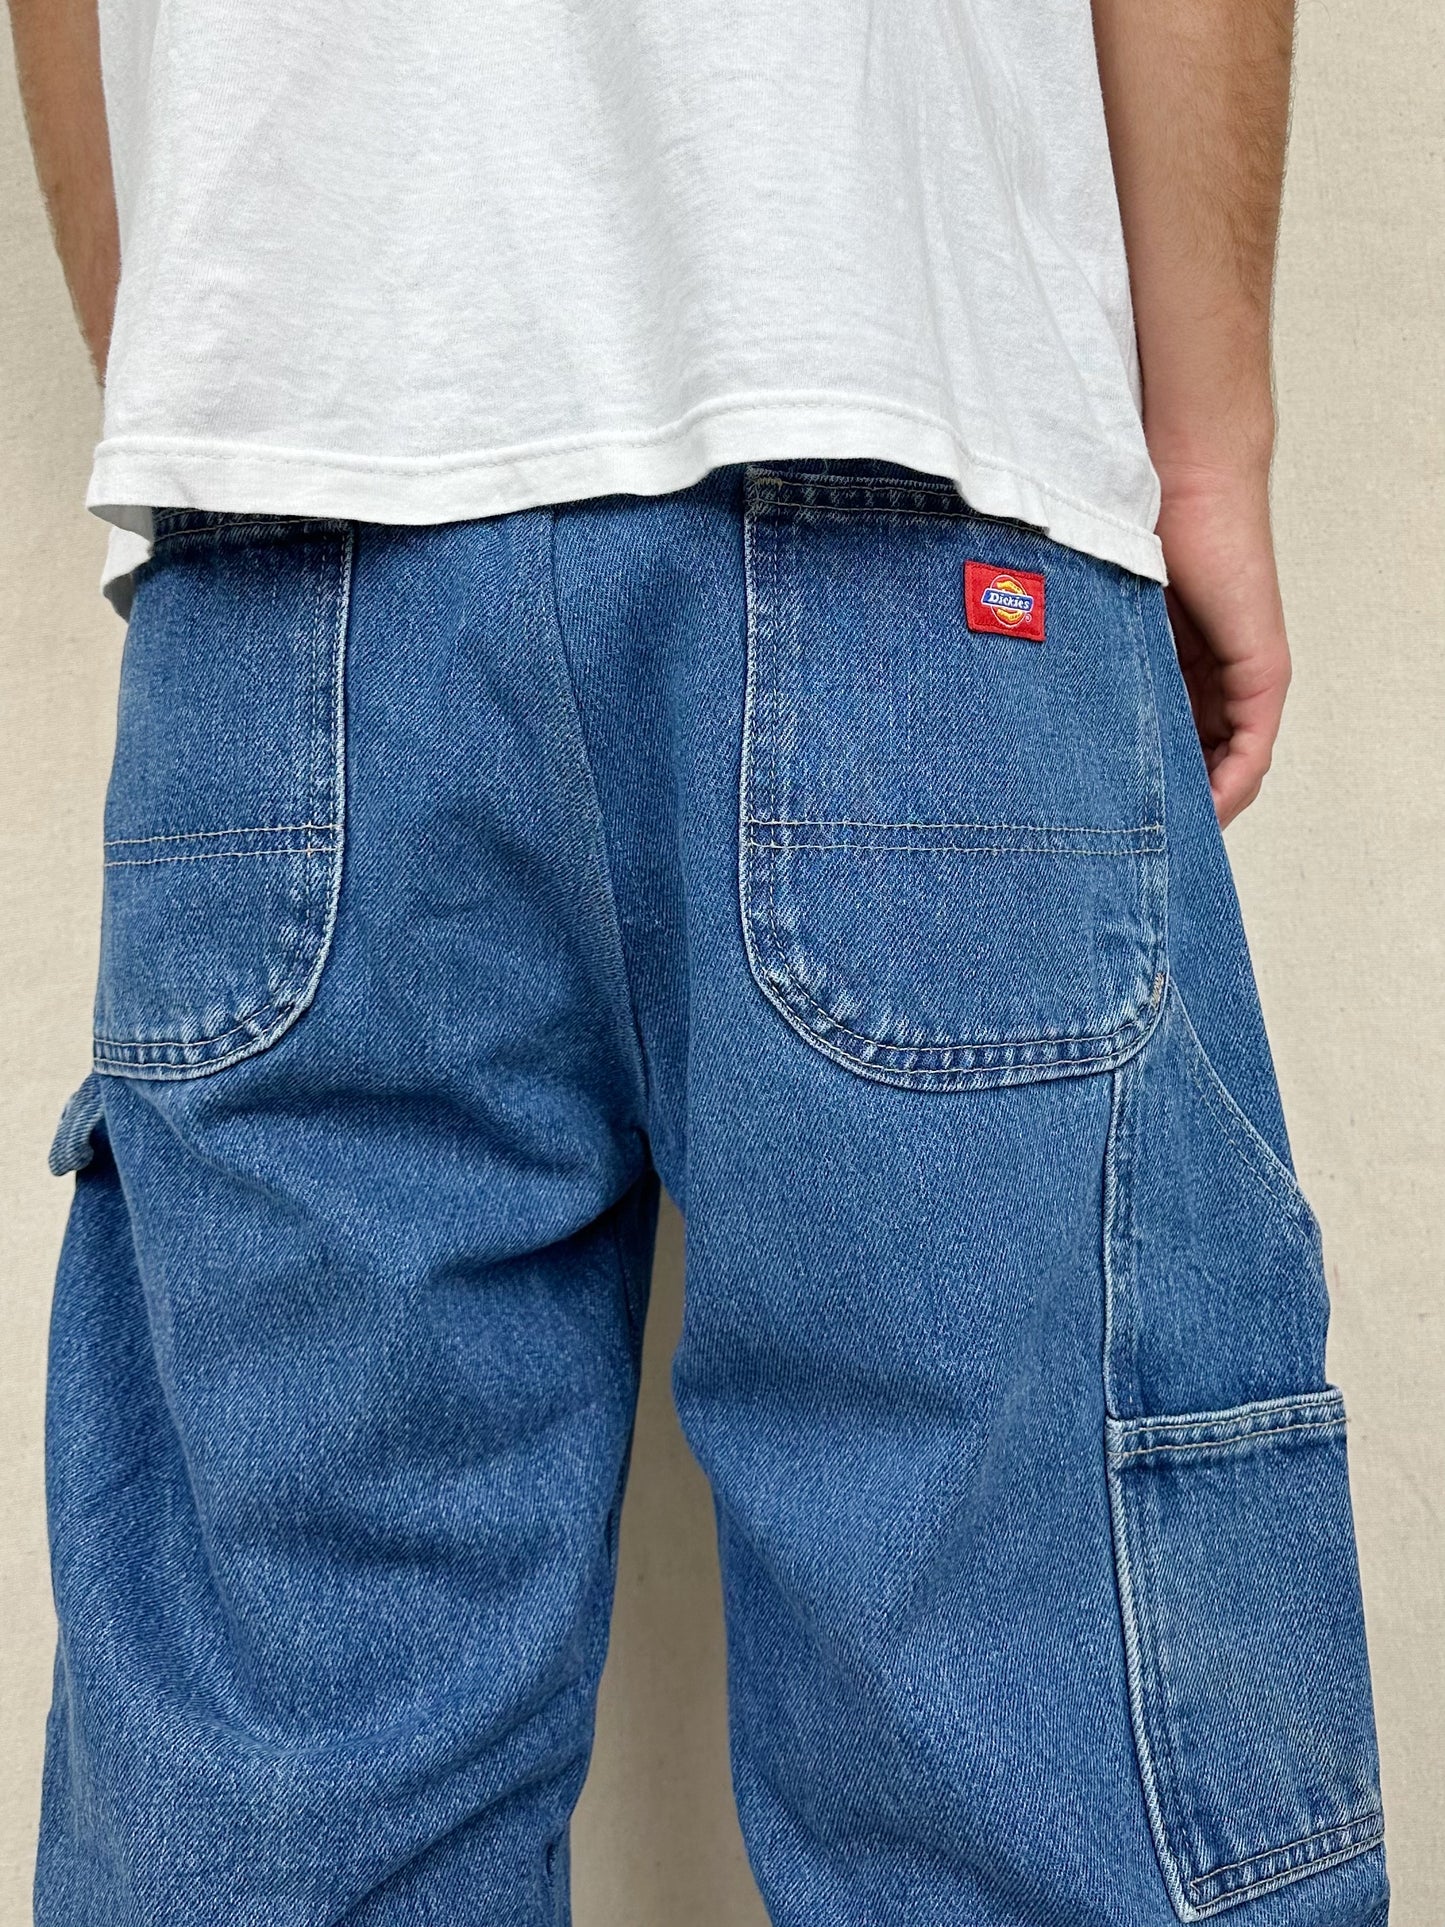 90's Dickies Heavy Duty Vintage Carpenter Jeans Size 35x32